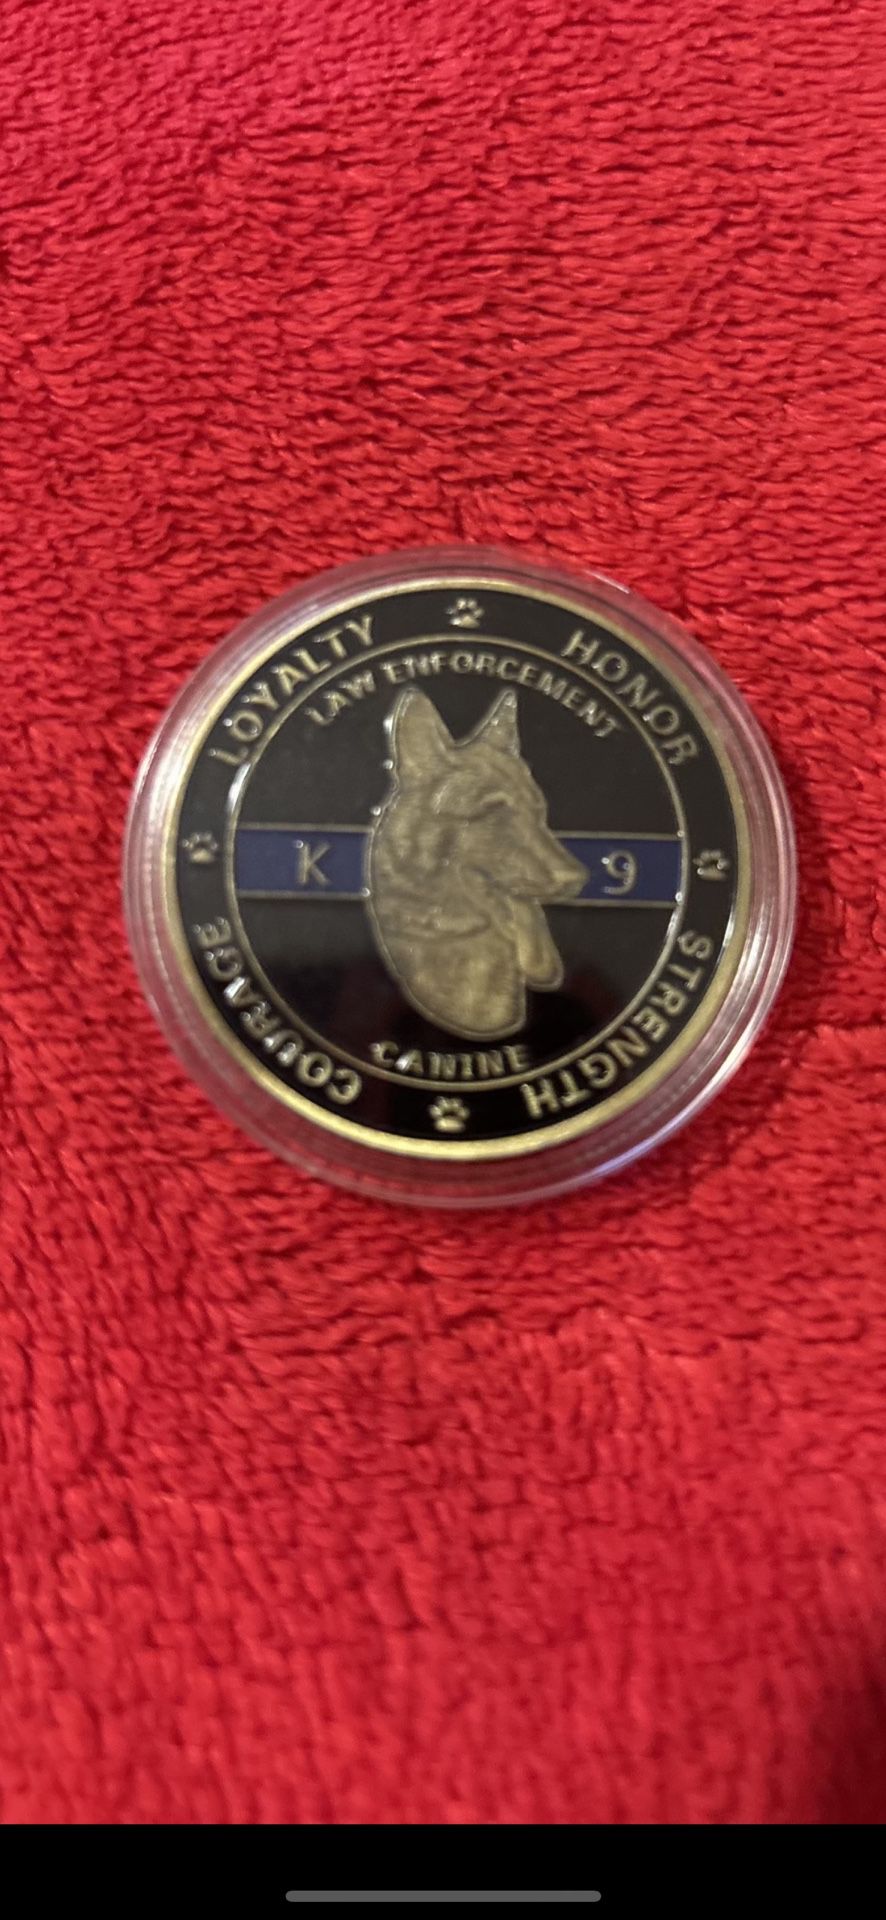 Guardians Of The Night K9 Challenge coin